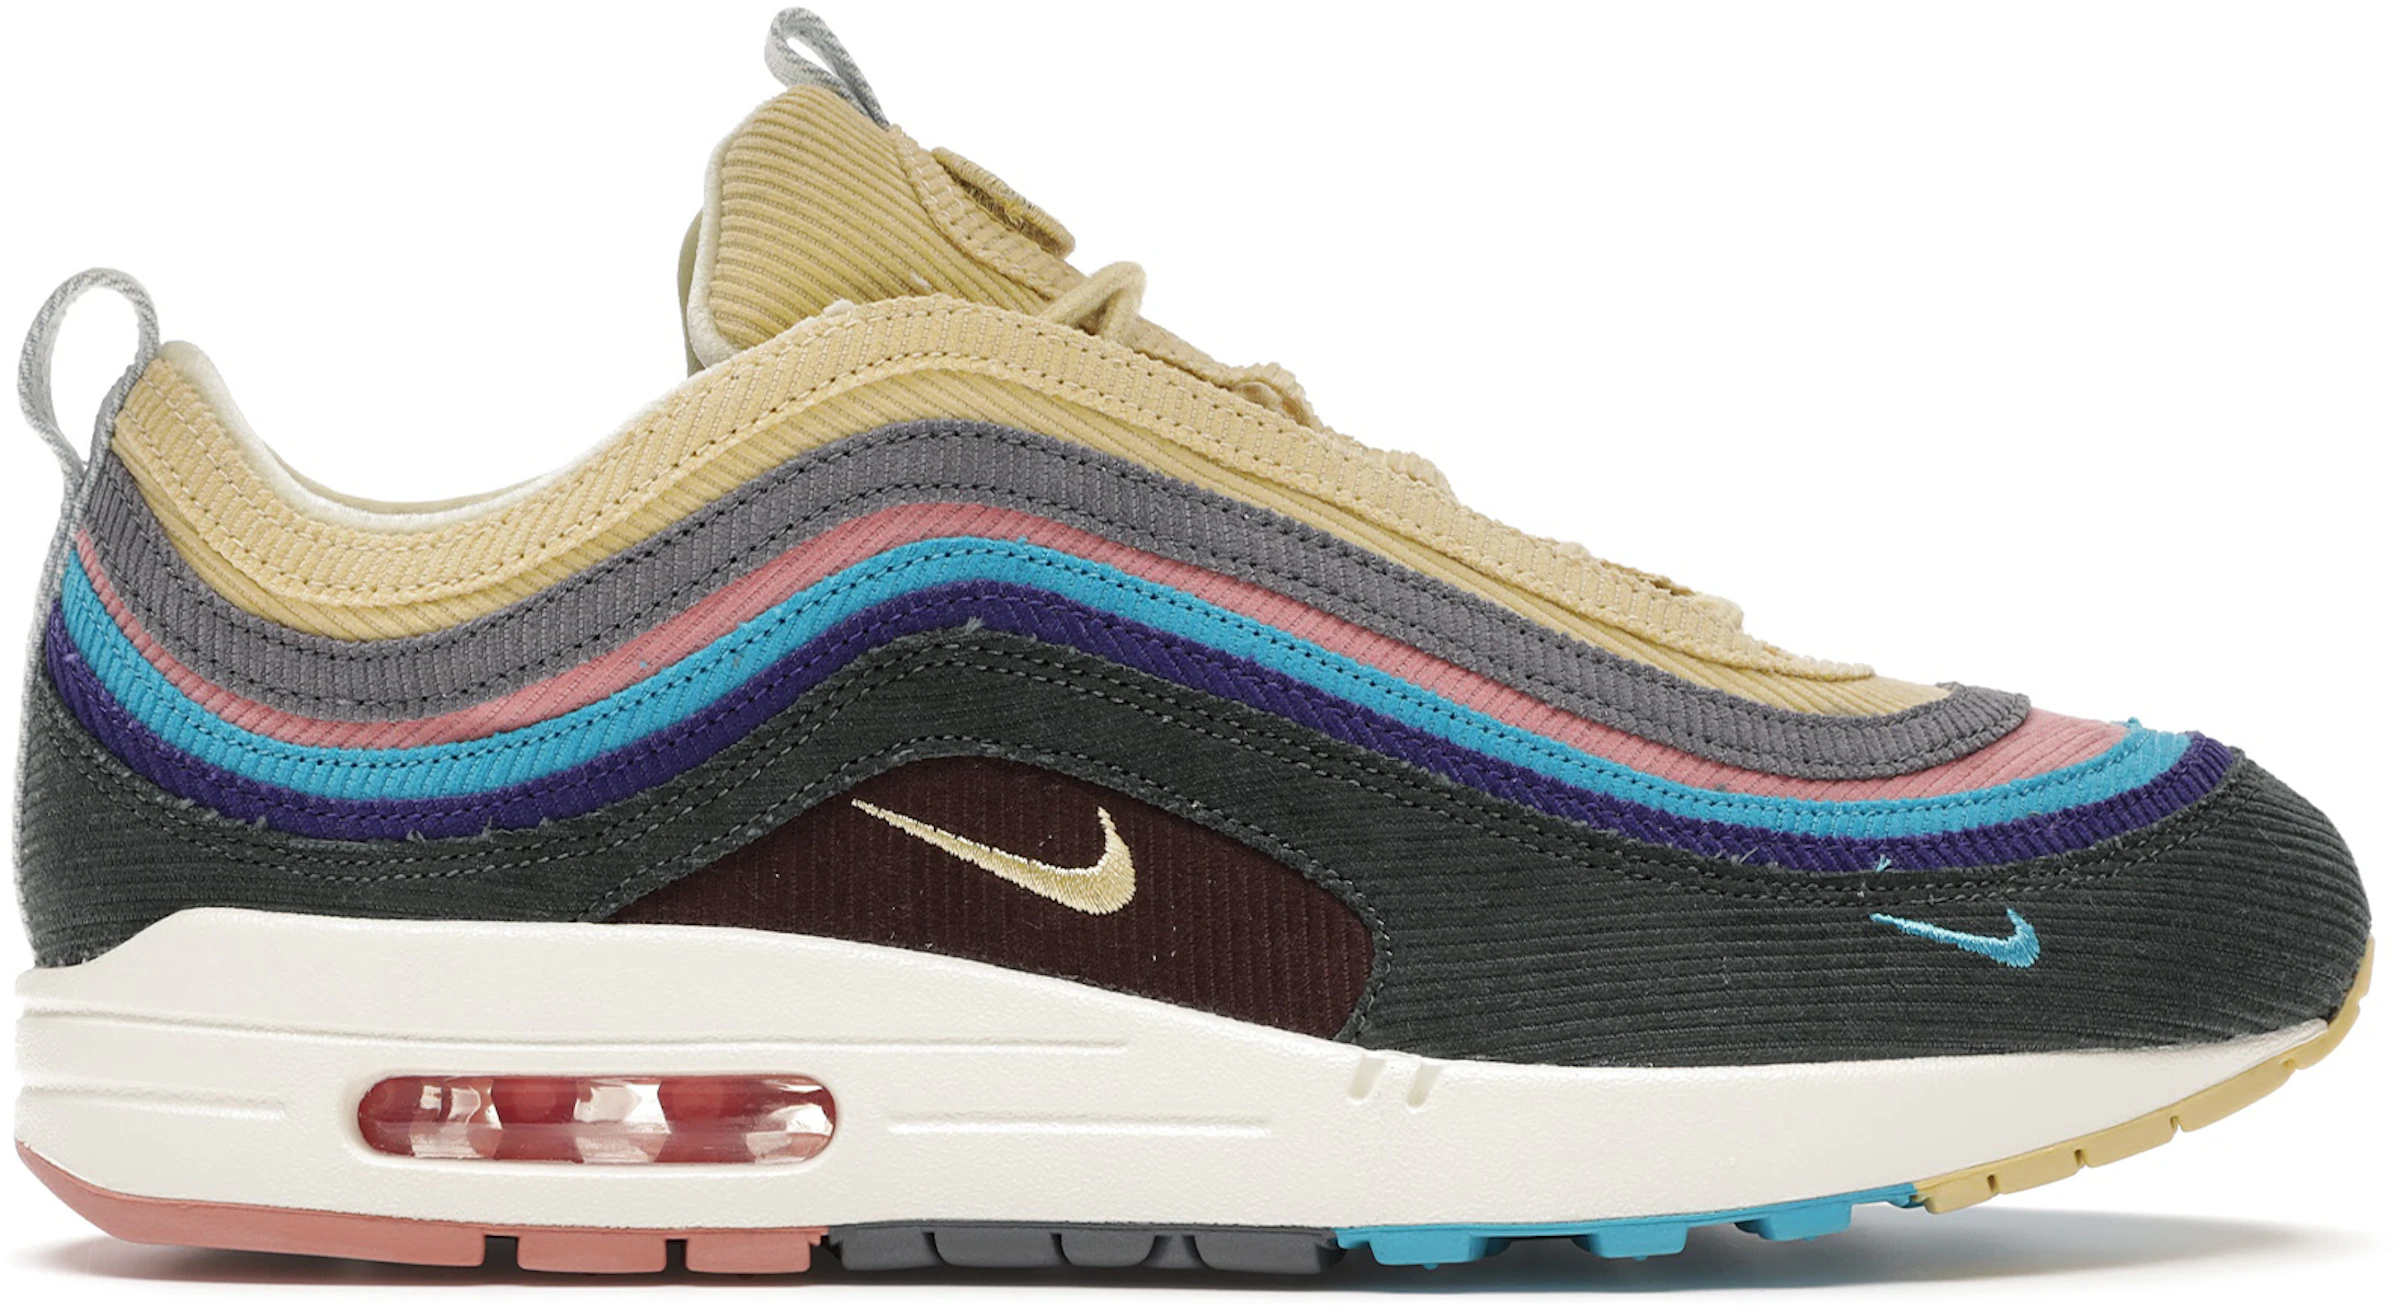 Nike Air Max Wotherspoon (All Accessories and Dustbag) - AJ4219-400 -